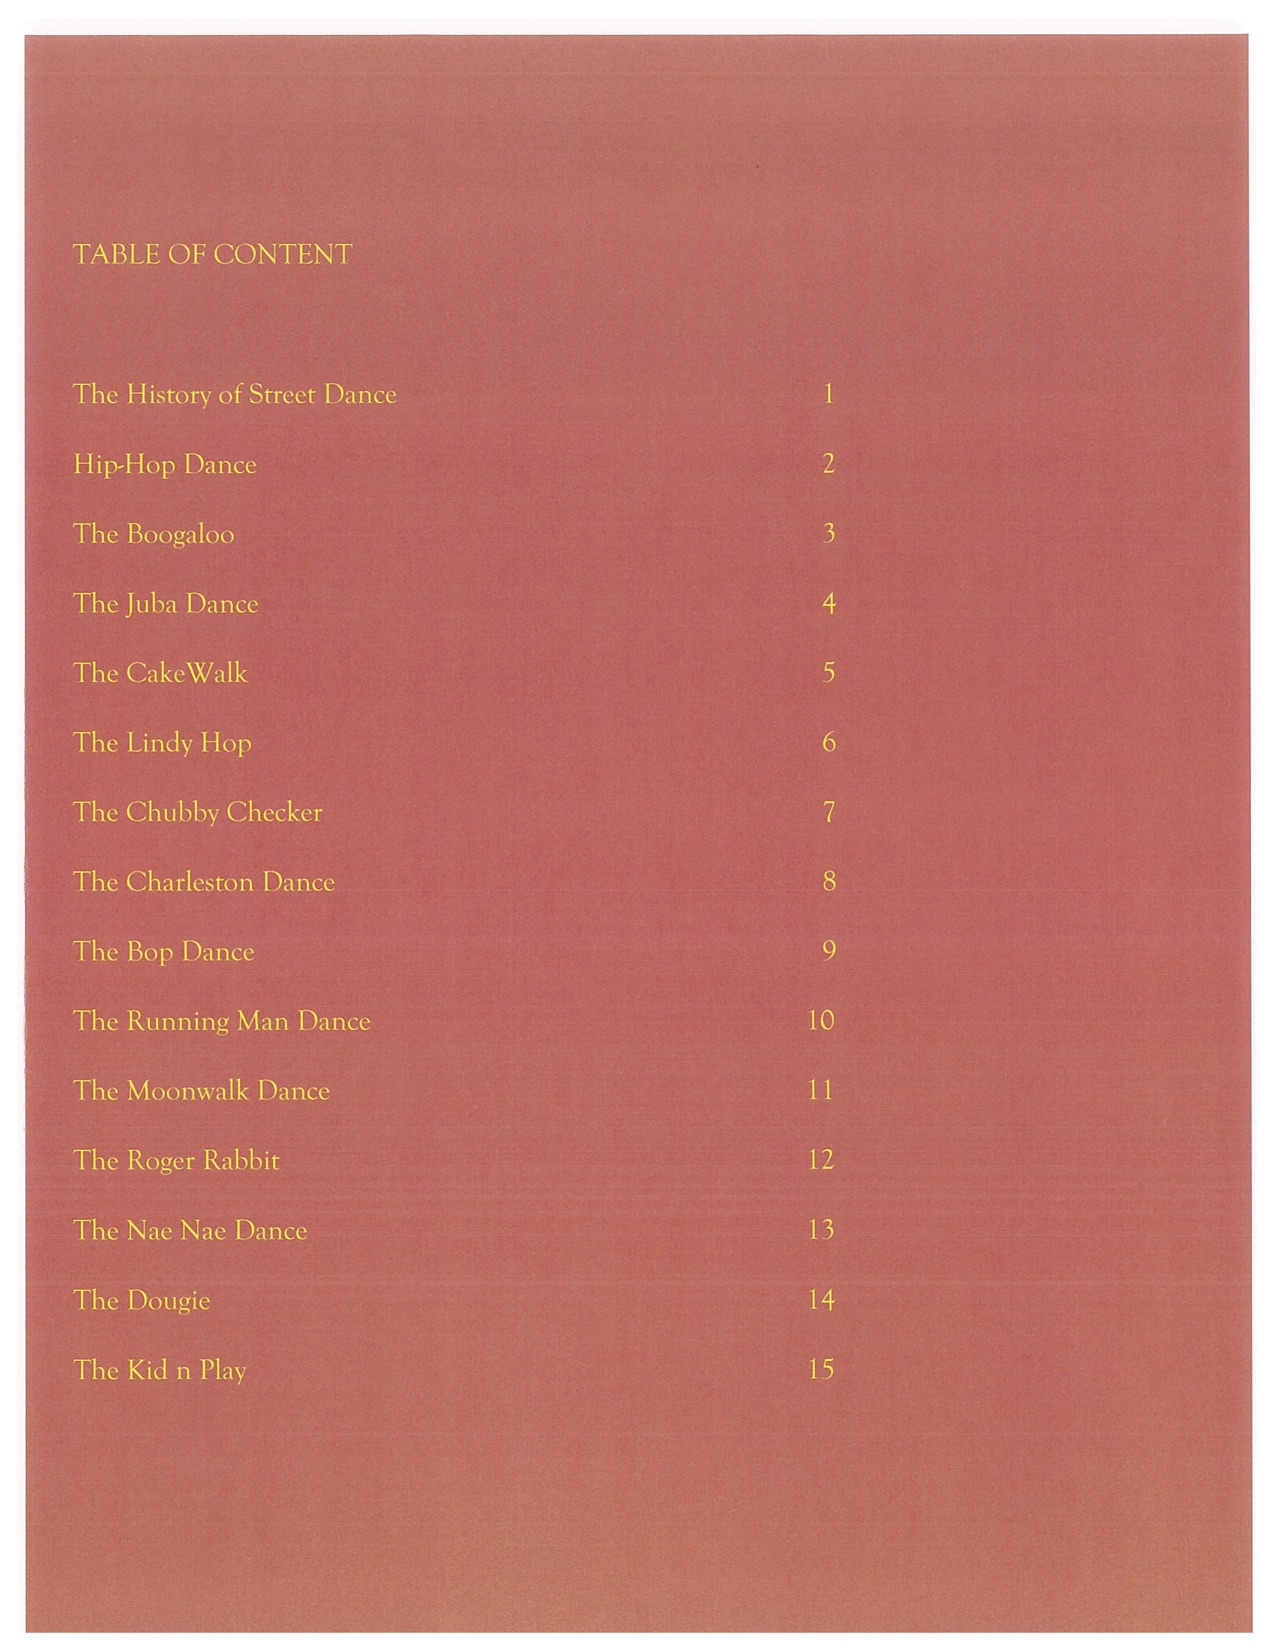 Table of contents.